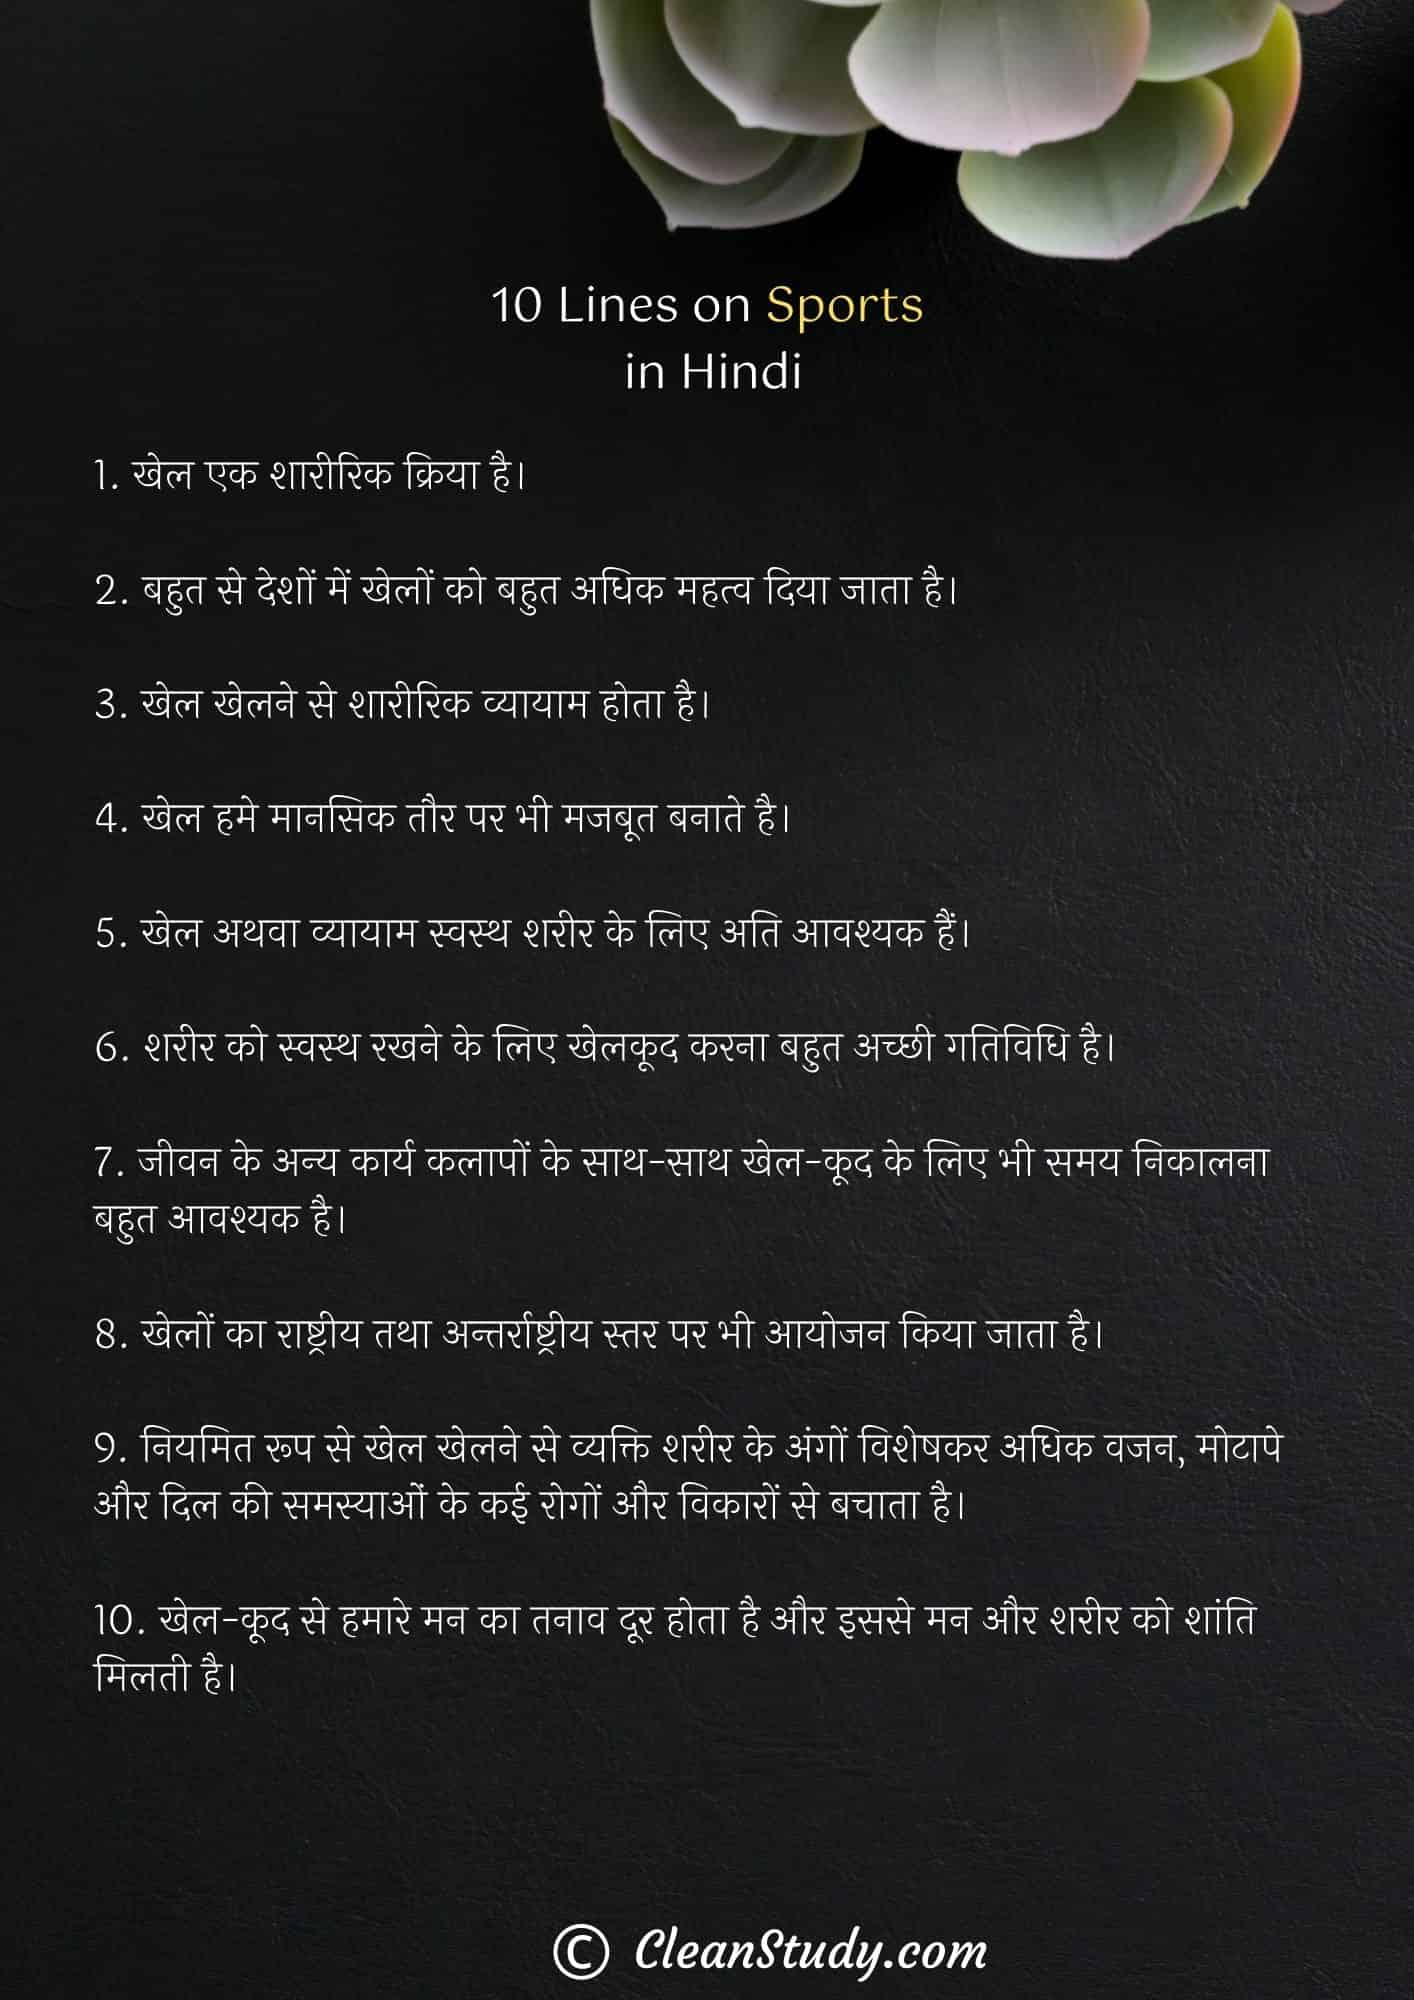 10 Lines on Sports in Hindi